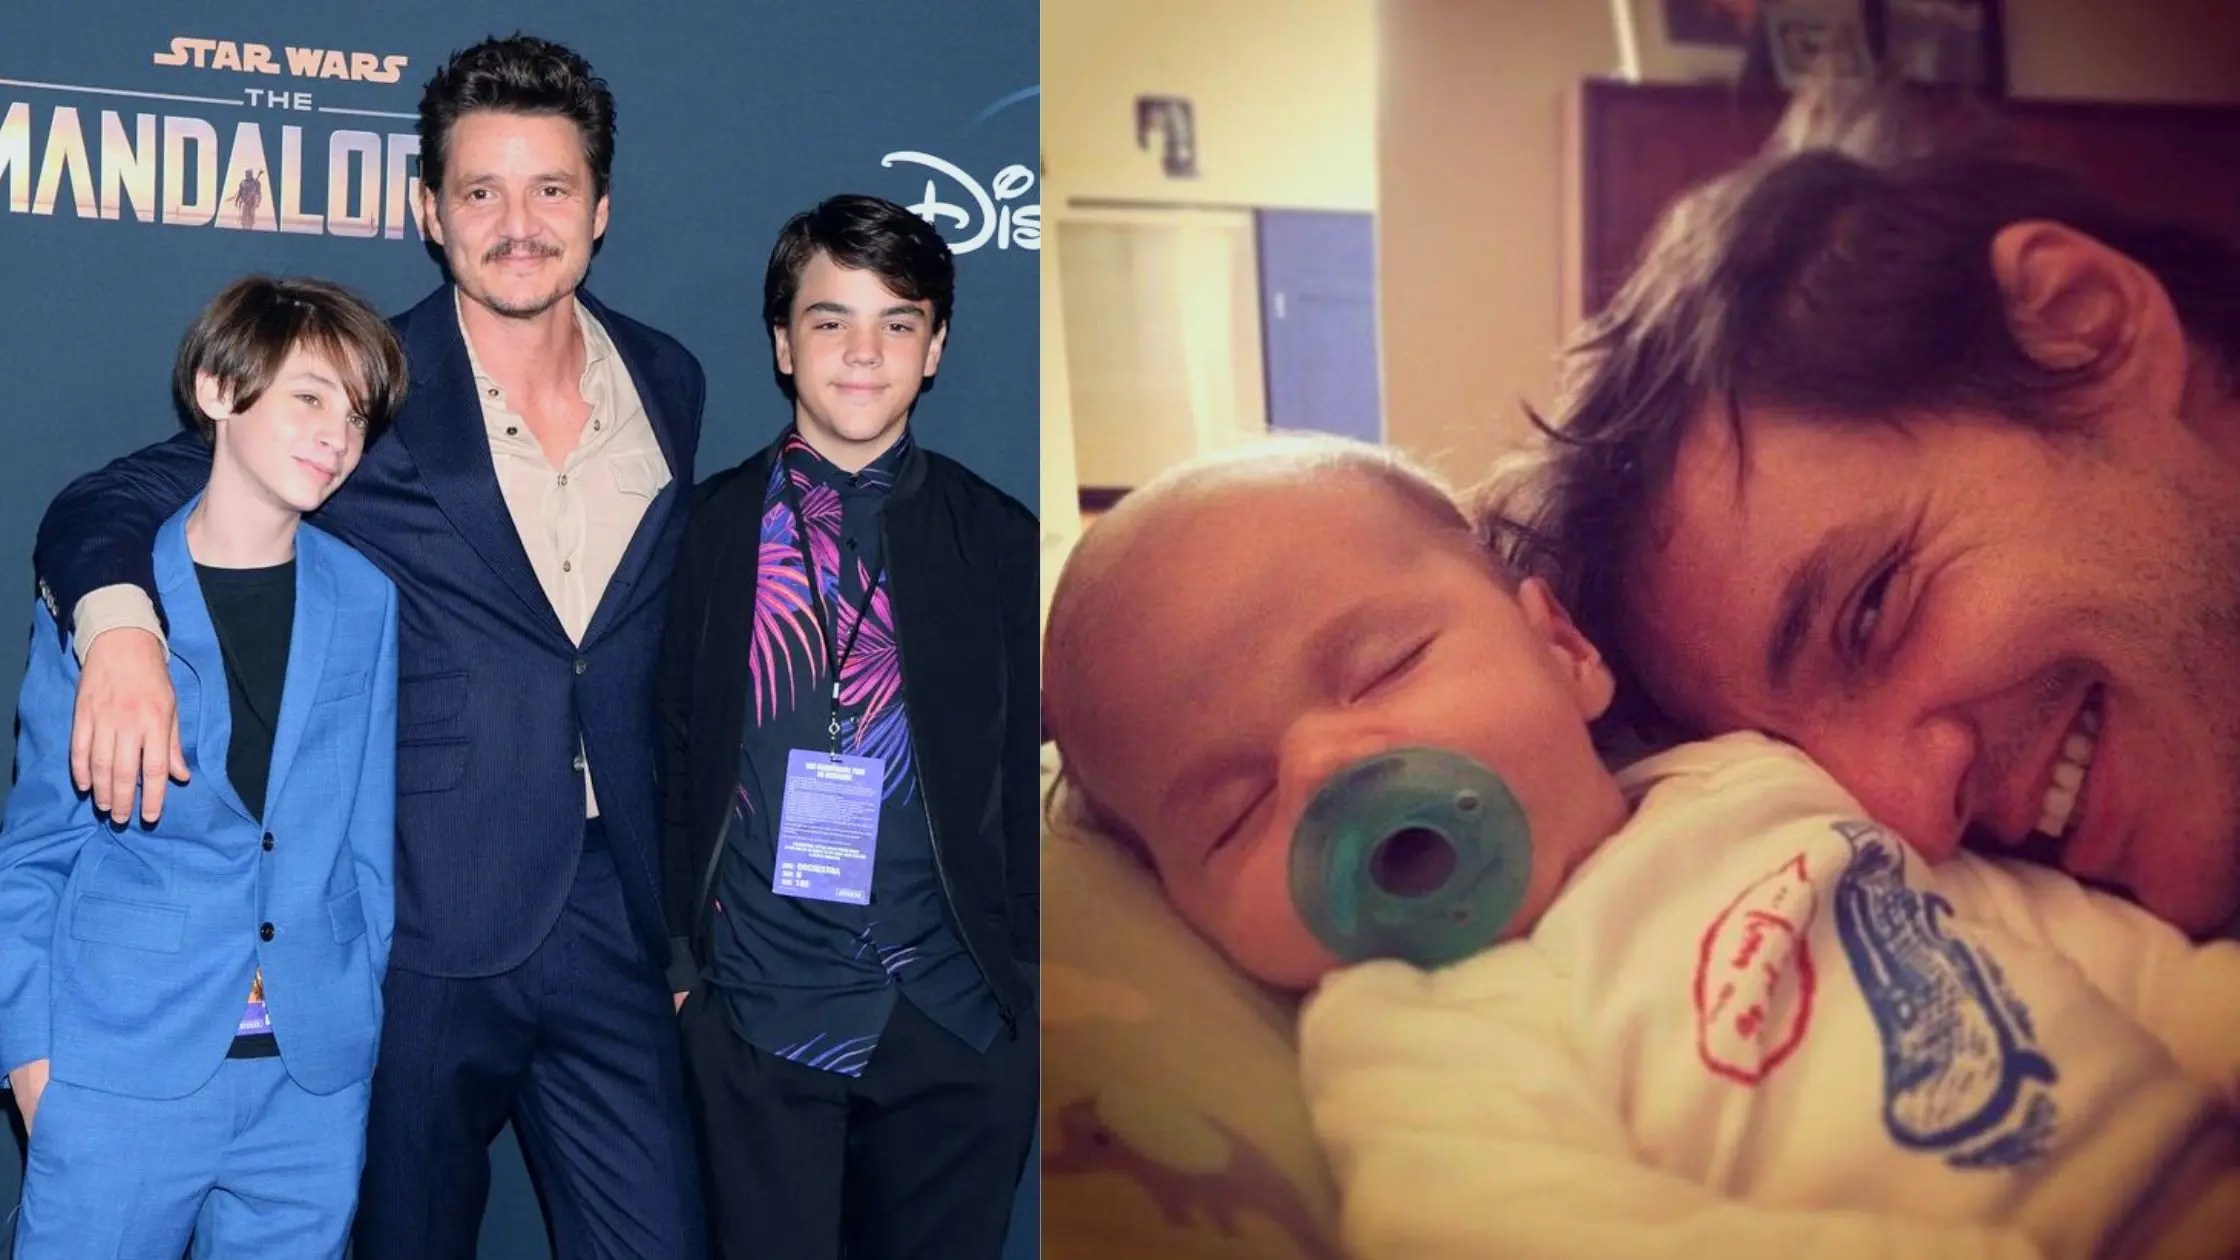 Pedro Pascal Kids Is Pedro Pascal A Father In Real Life? Does He Have